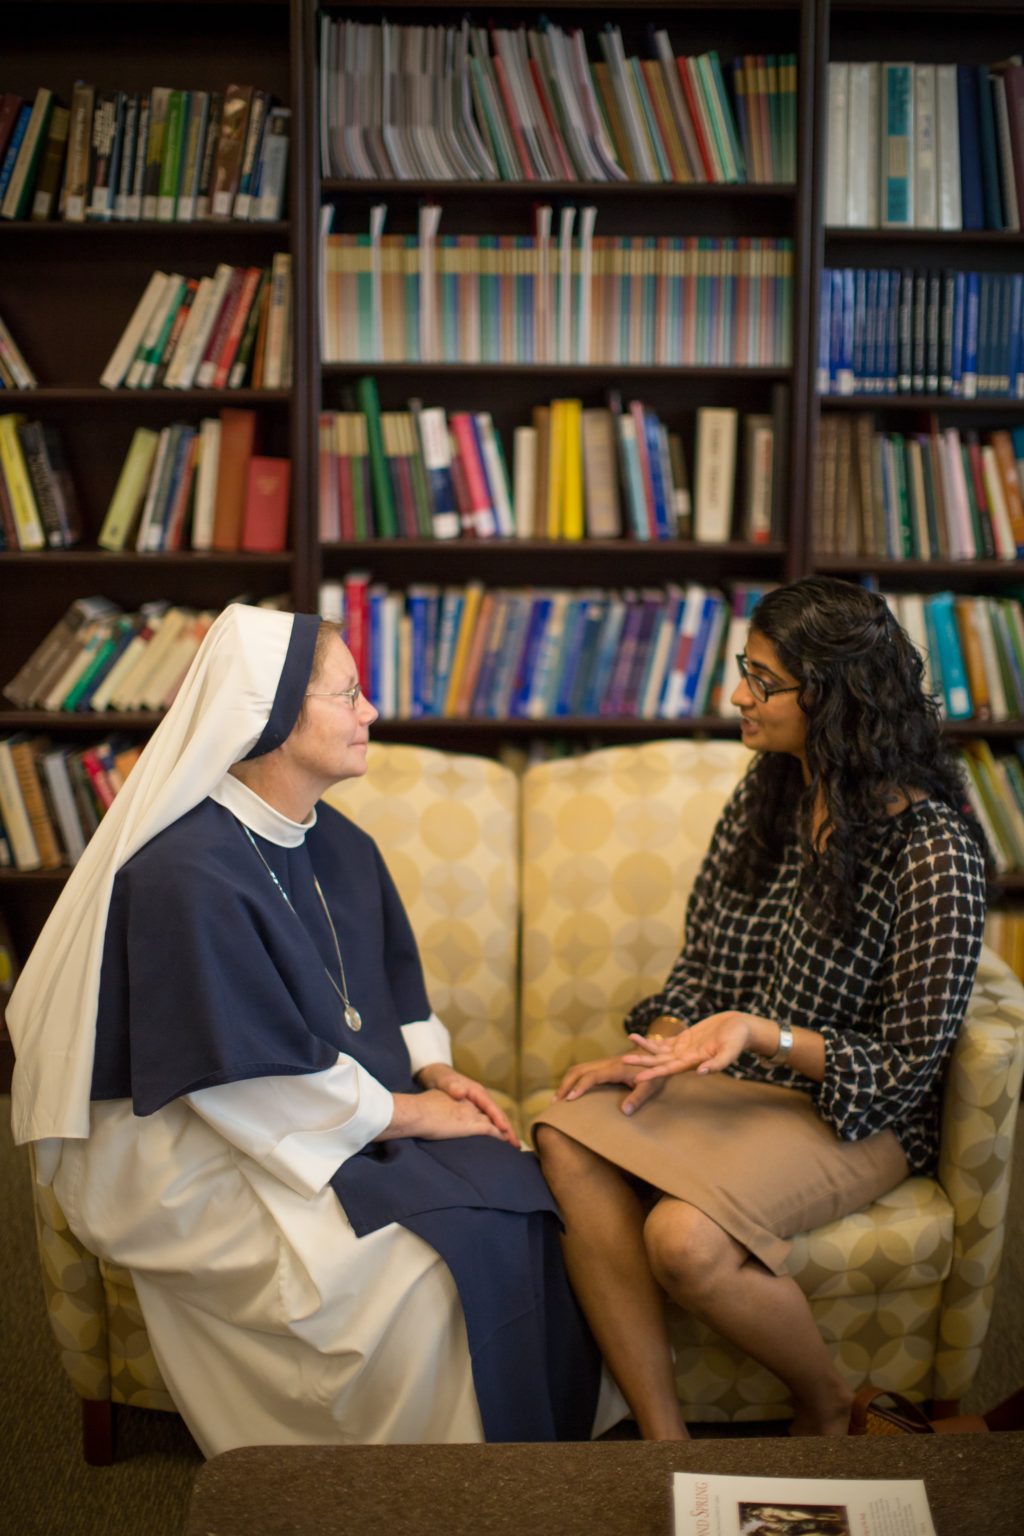 A nun and a female student having a conversation in a library